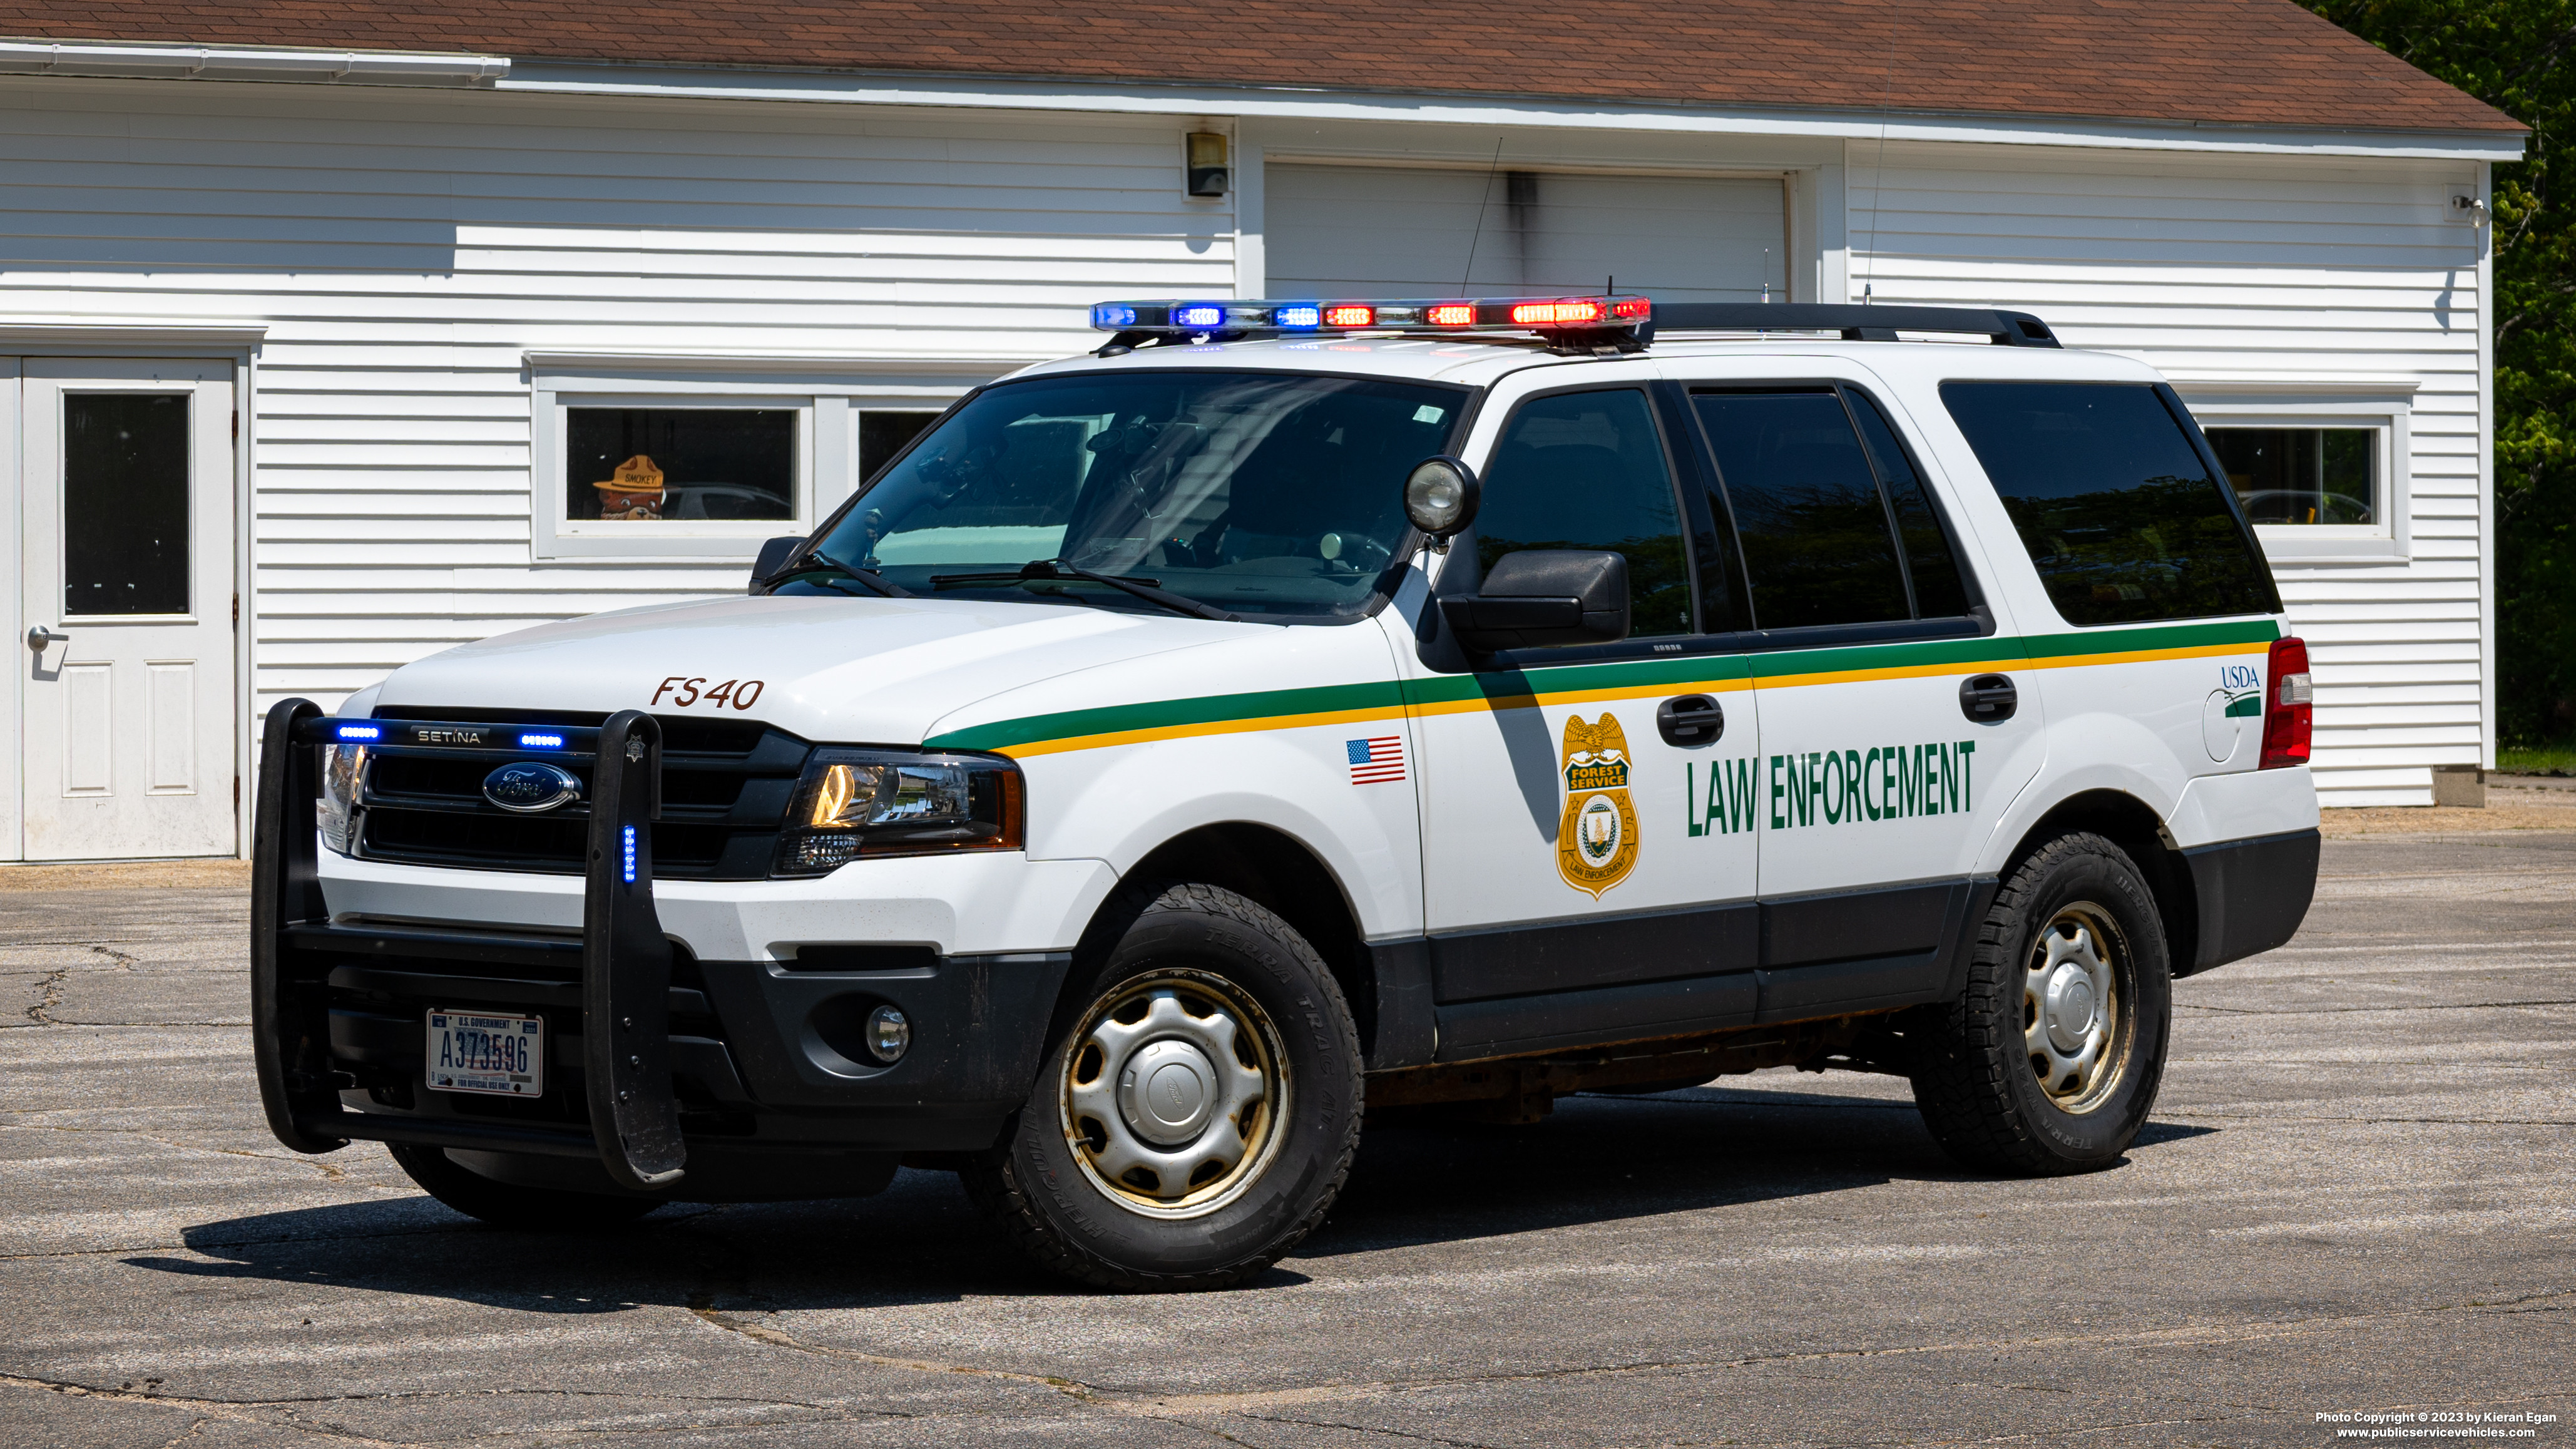 A photo  of United States Department of Agriculture Forest Service Law Enforcement
            Cruiser FS40, a 2017 Ford Expedition             taken by Kieran Egan